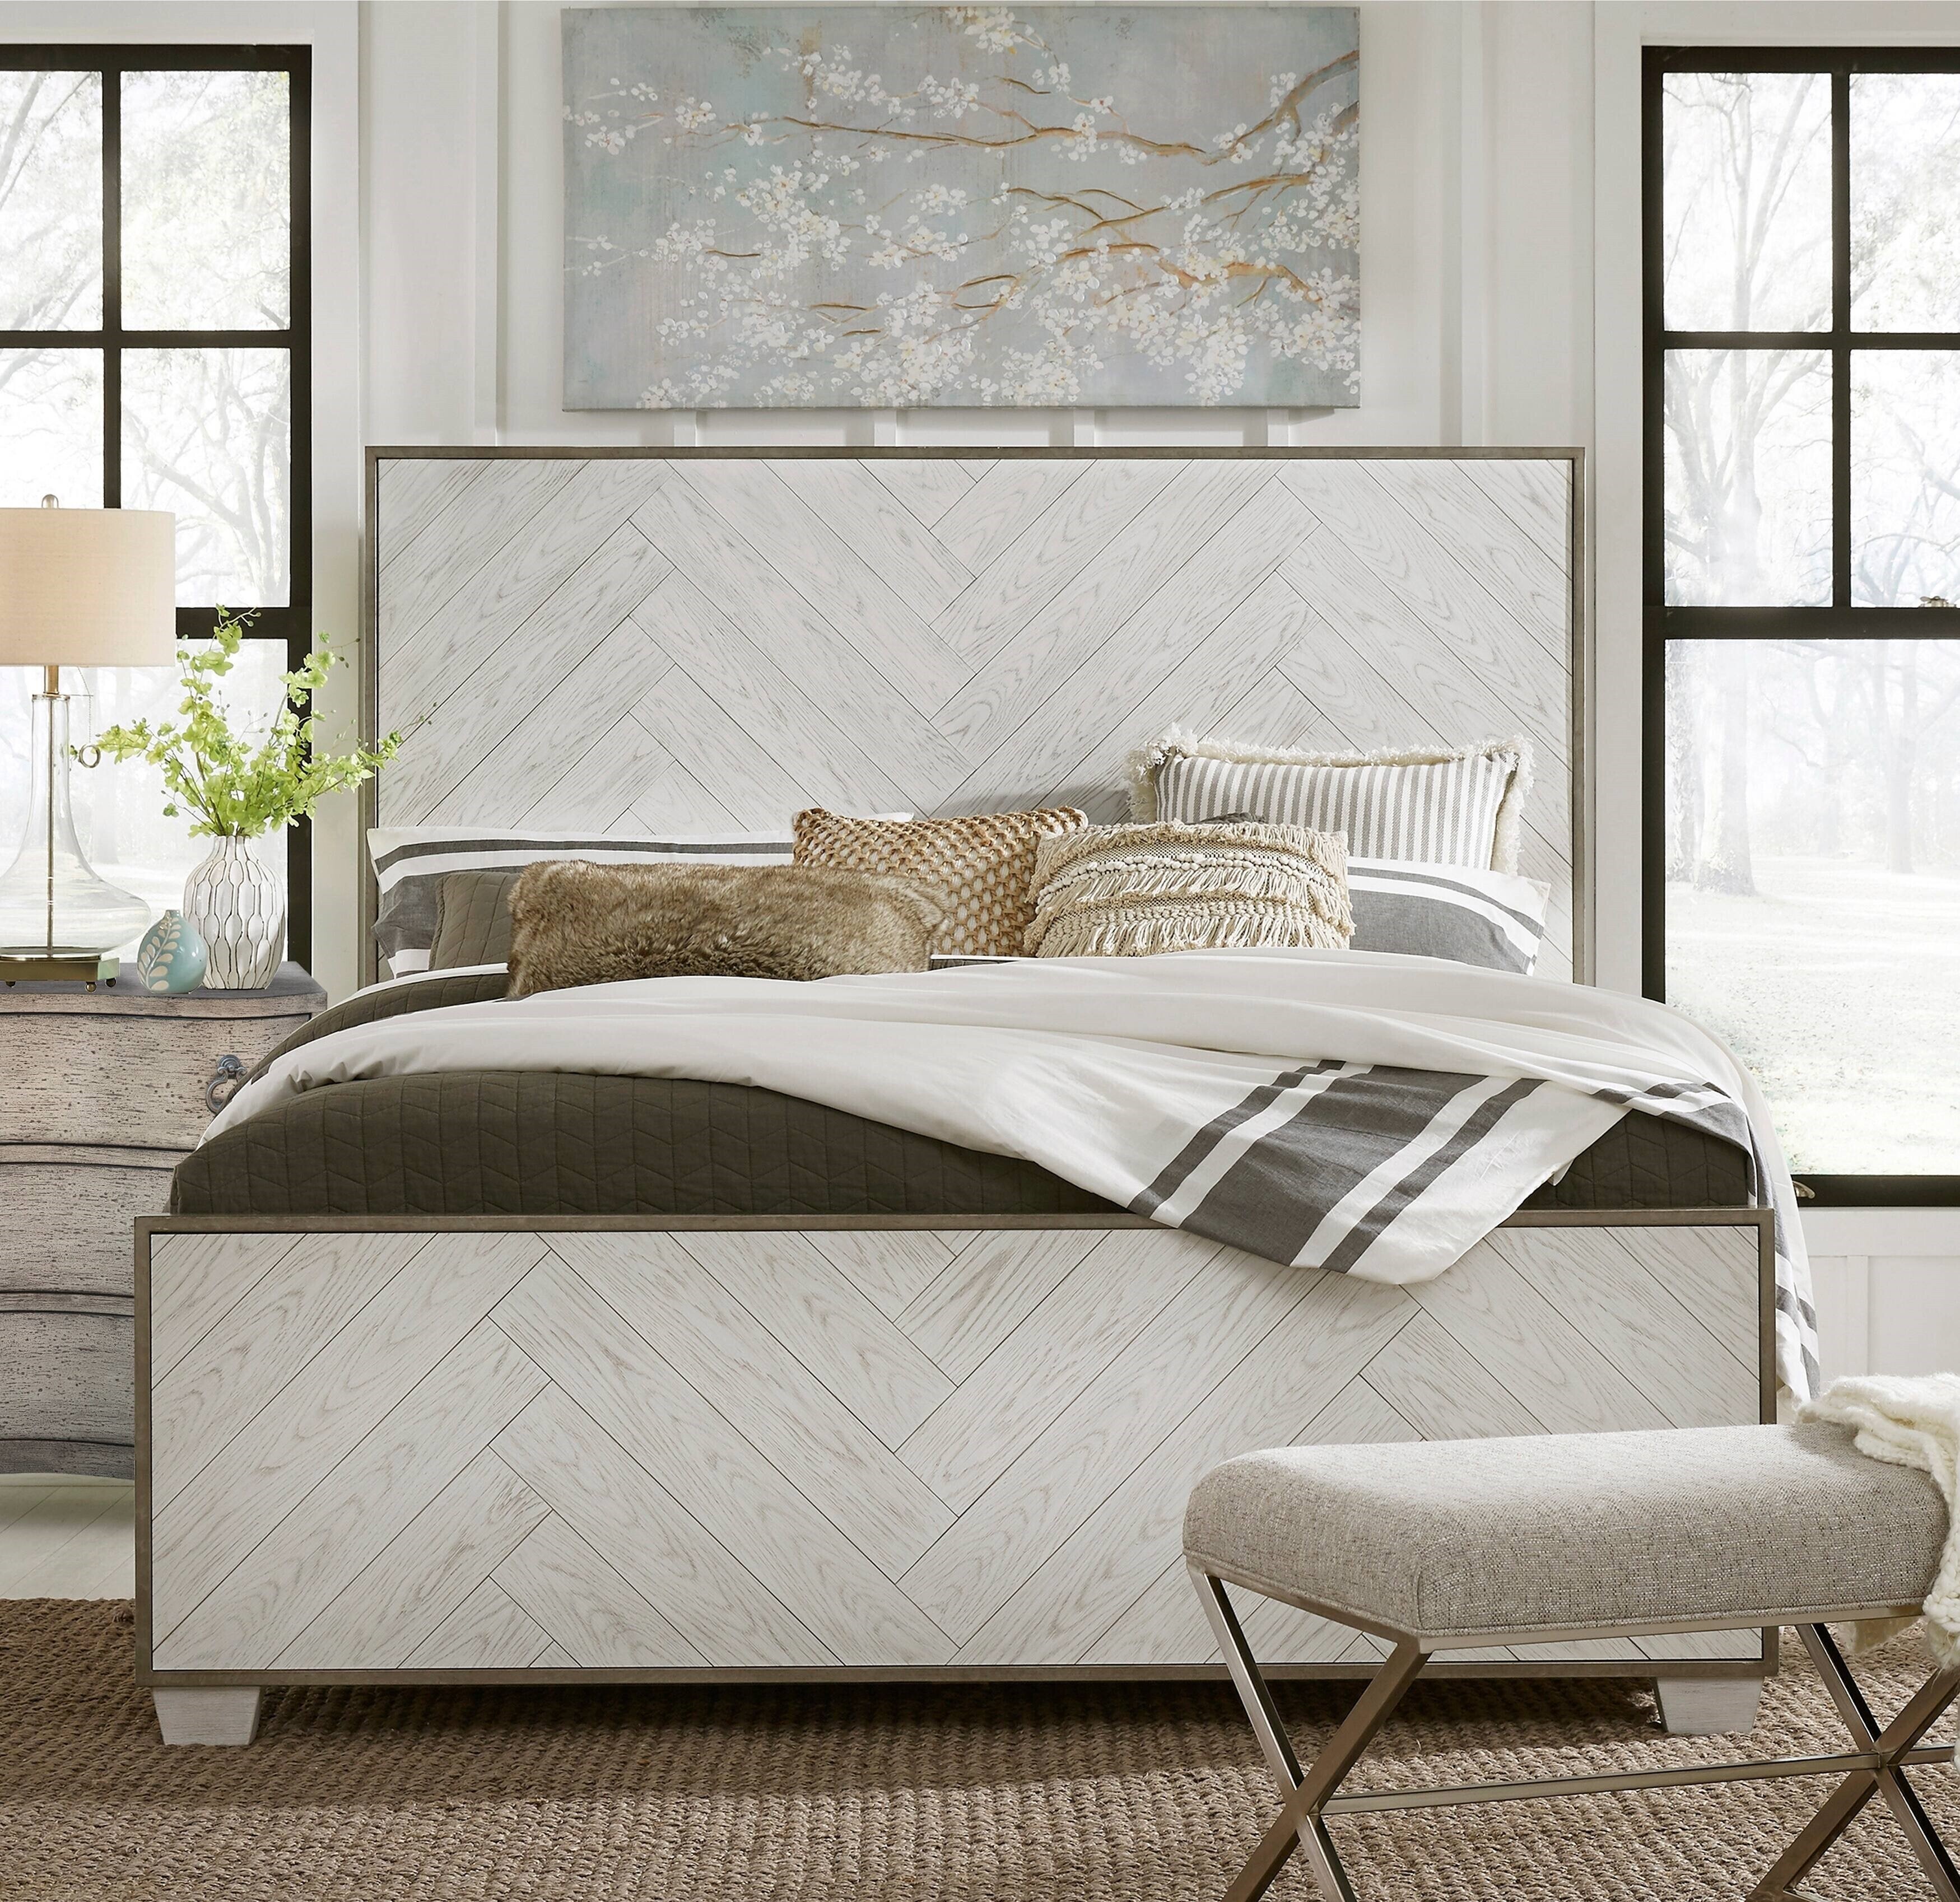 Wood and Metal Headboard Queen sized With Metal Outlining and Chevron Patterns